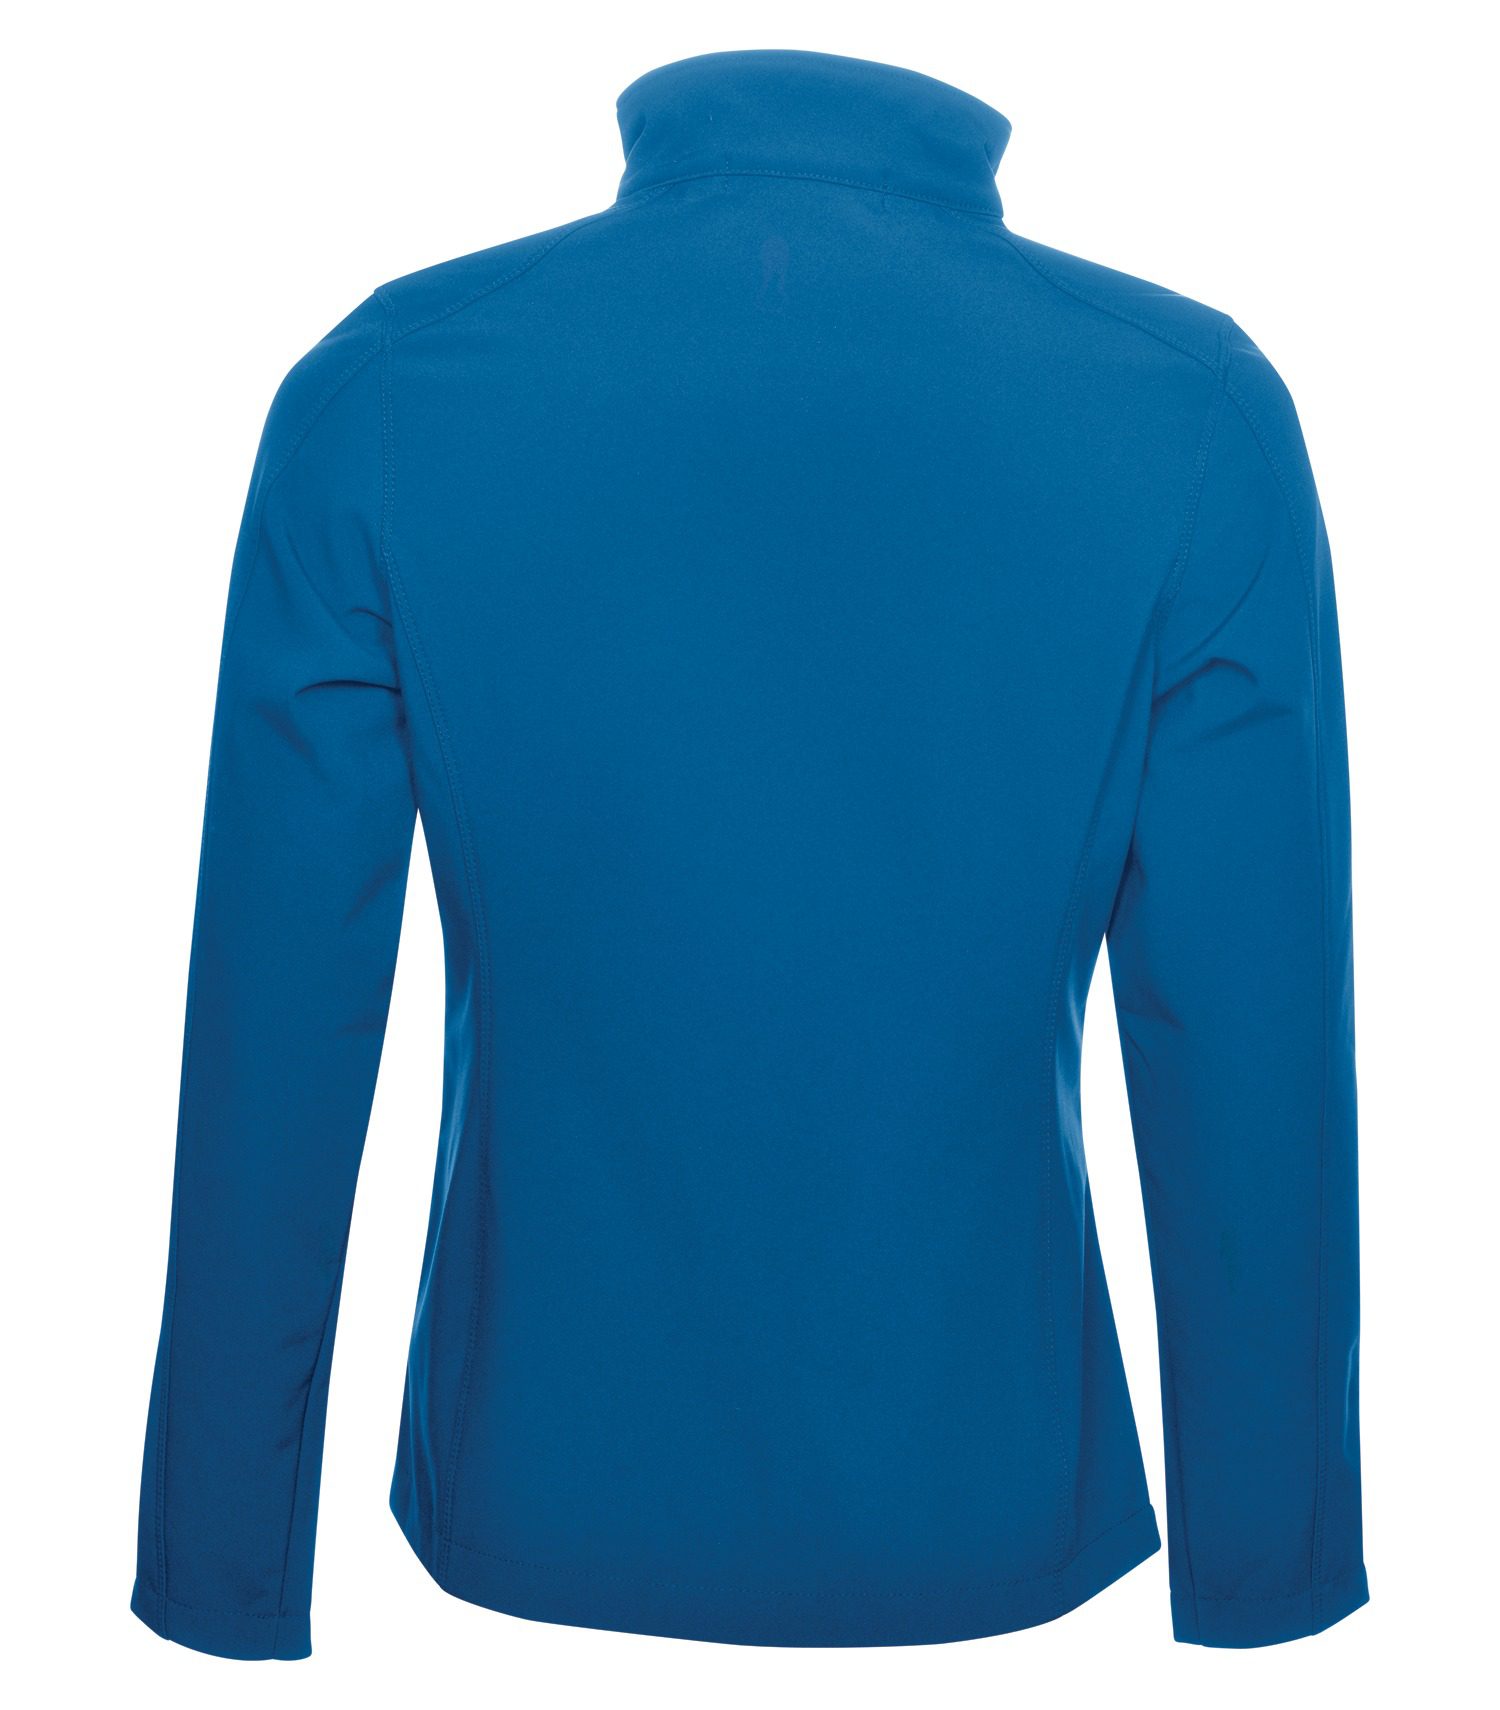 COAL HARBOUR EVERYDAY WATER REPELLENT SOFT SHELL LADIES' JACKET #L7603 Imperial Blue Back